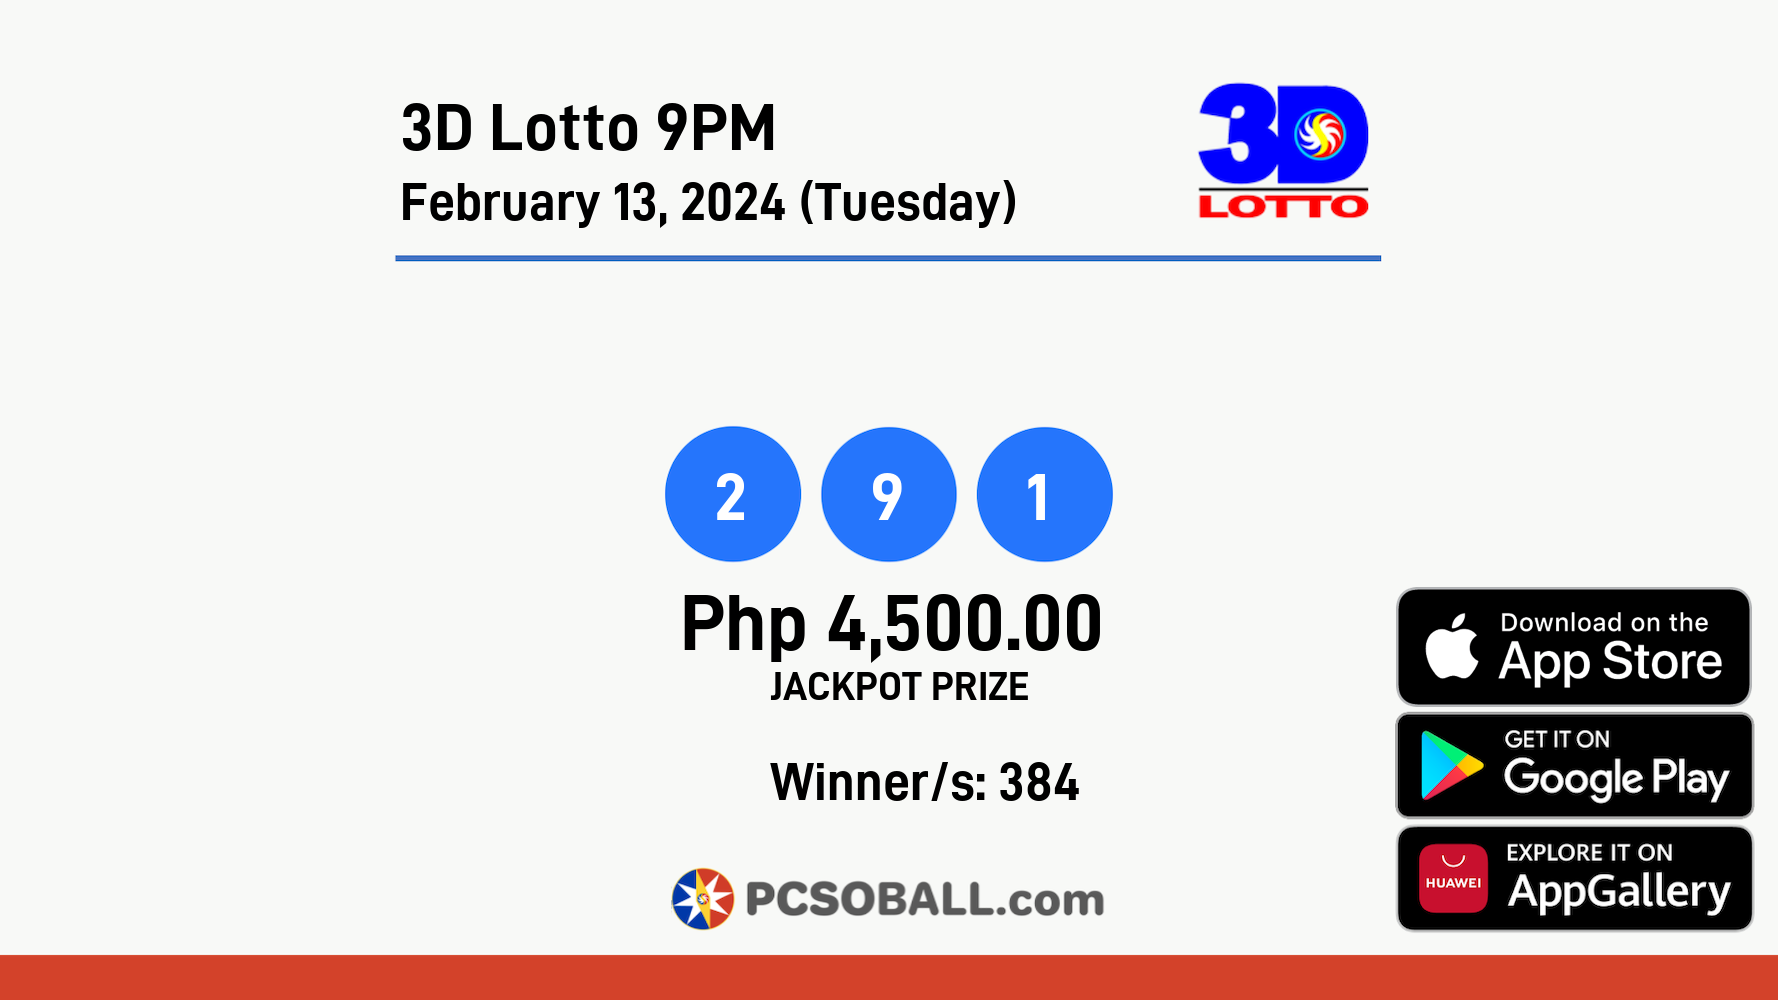 3D Lotto 9PM February 13, 2024 (Tuesday) Result